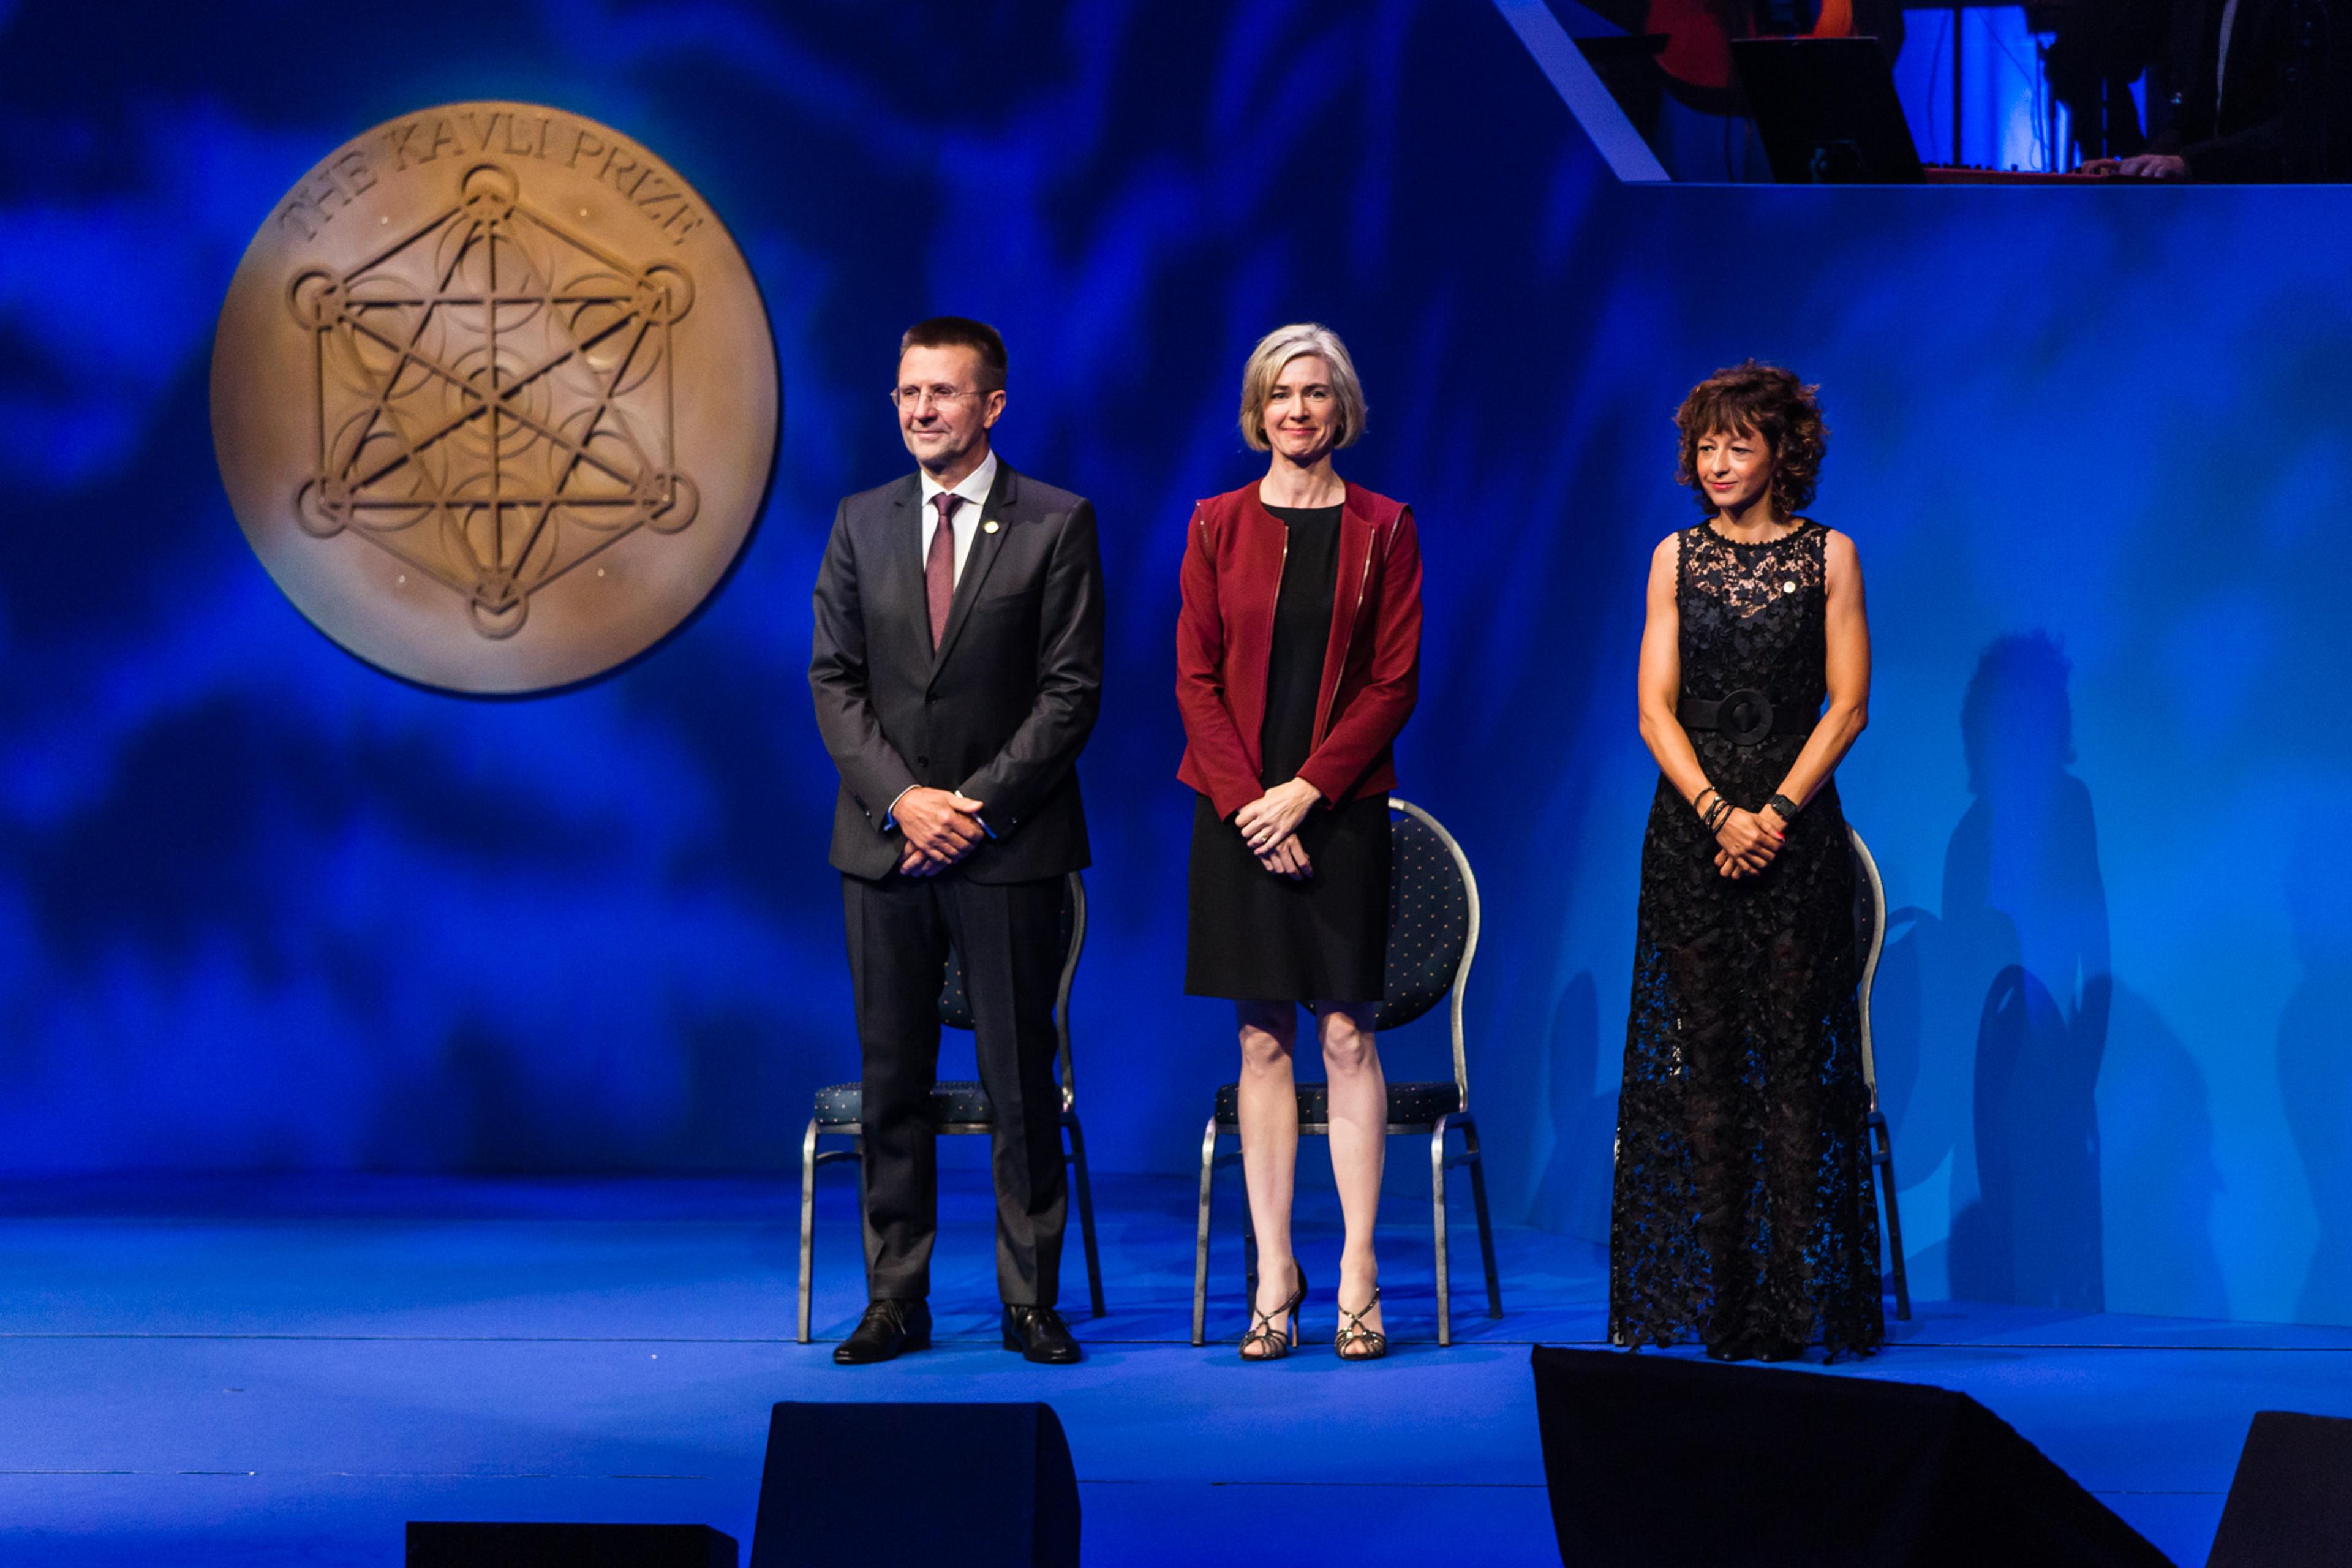 The 2018 Kavli Prize nanoscience laureates on stage at Oslo Concert Hall